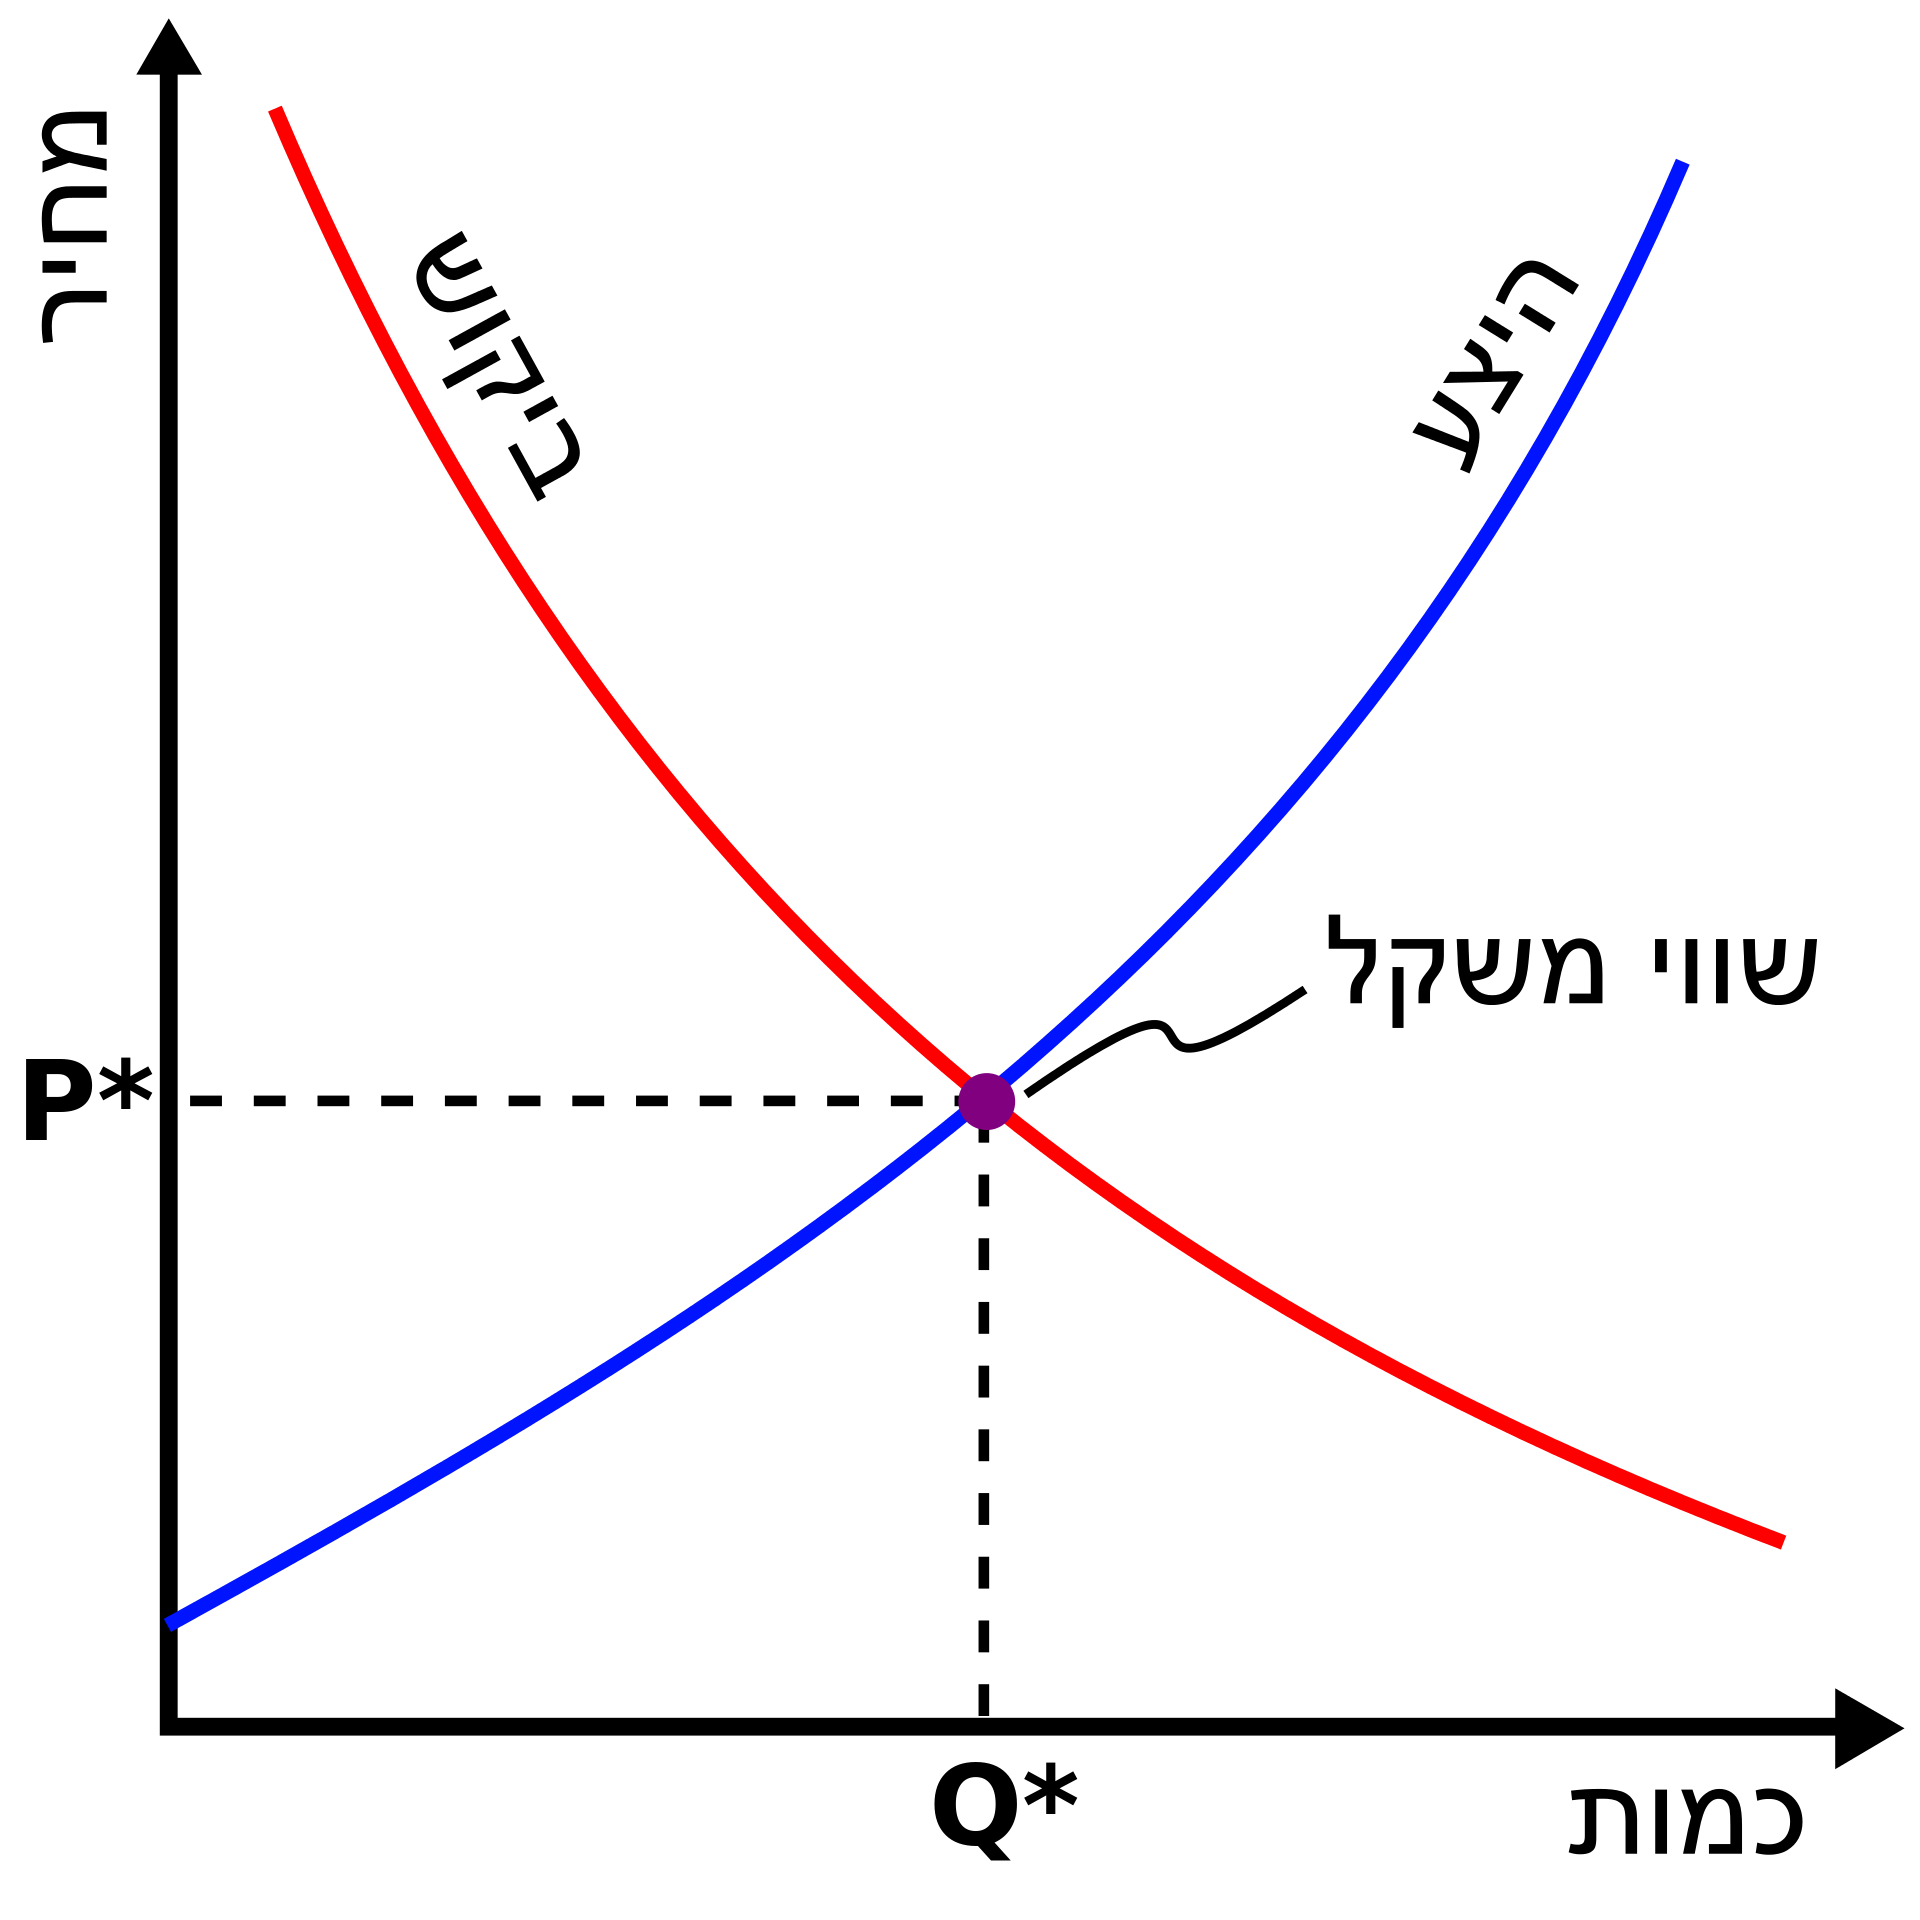 1920px-Supply-demand-equilibrium-he.svg.png